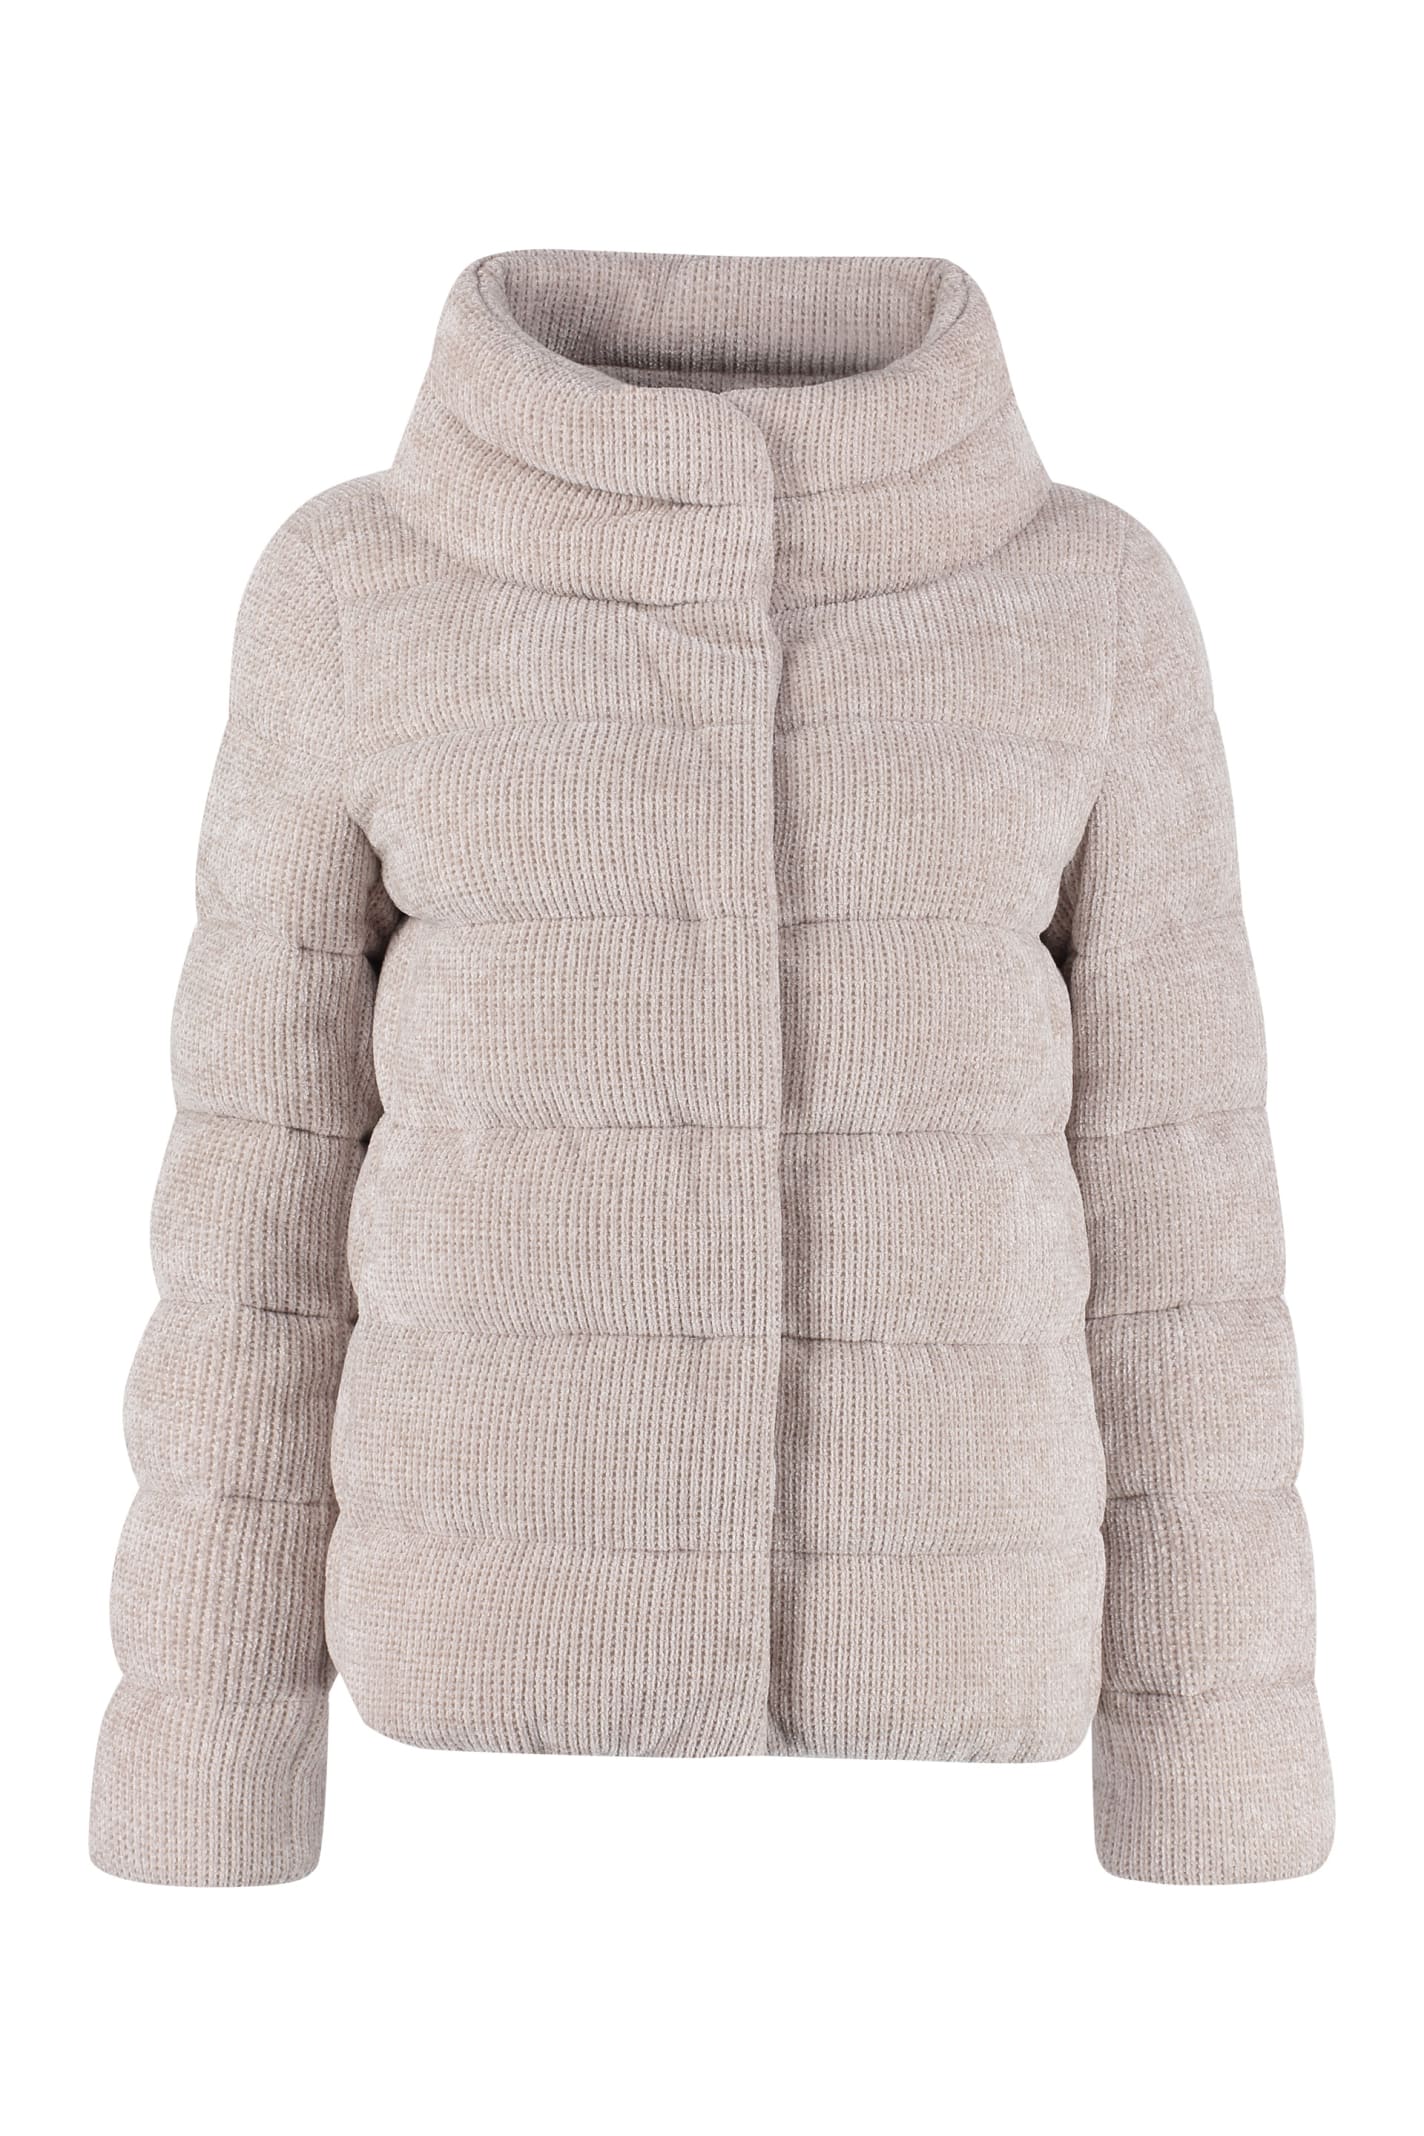 Herno Chenille Down Jacket